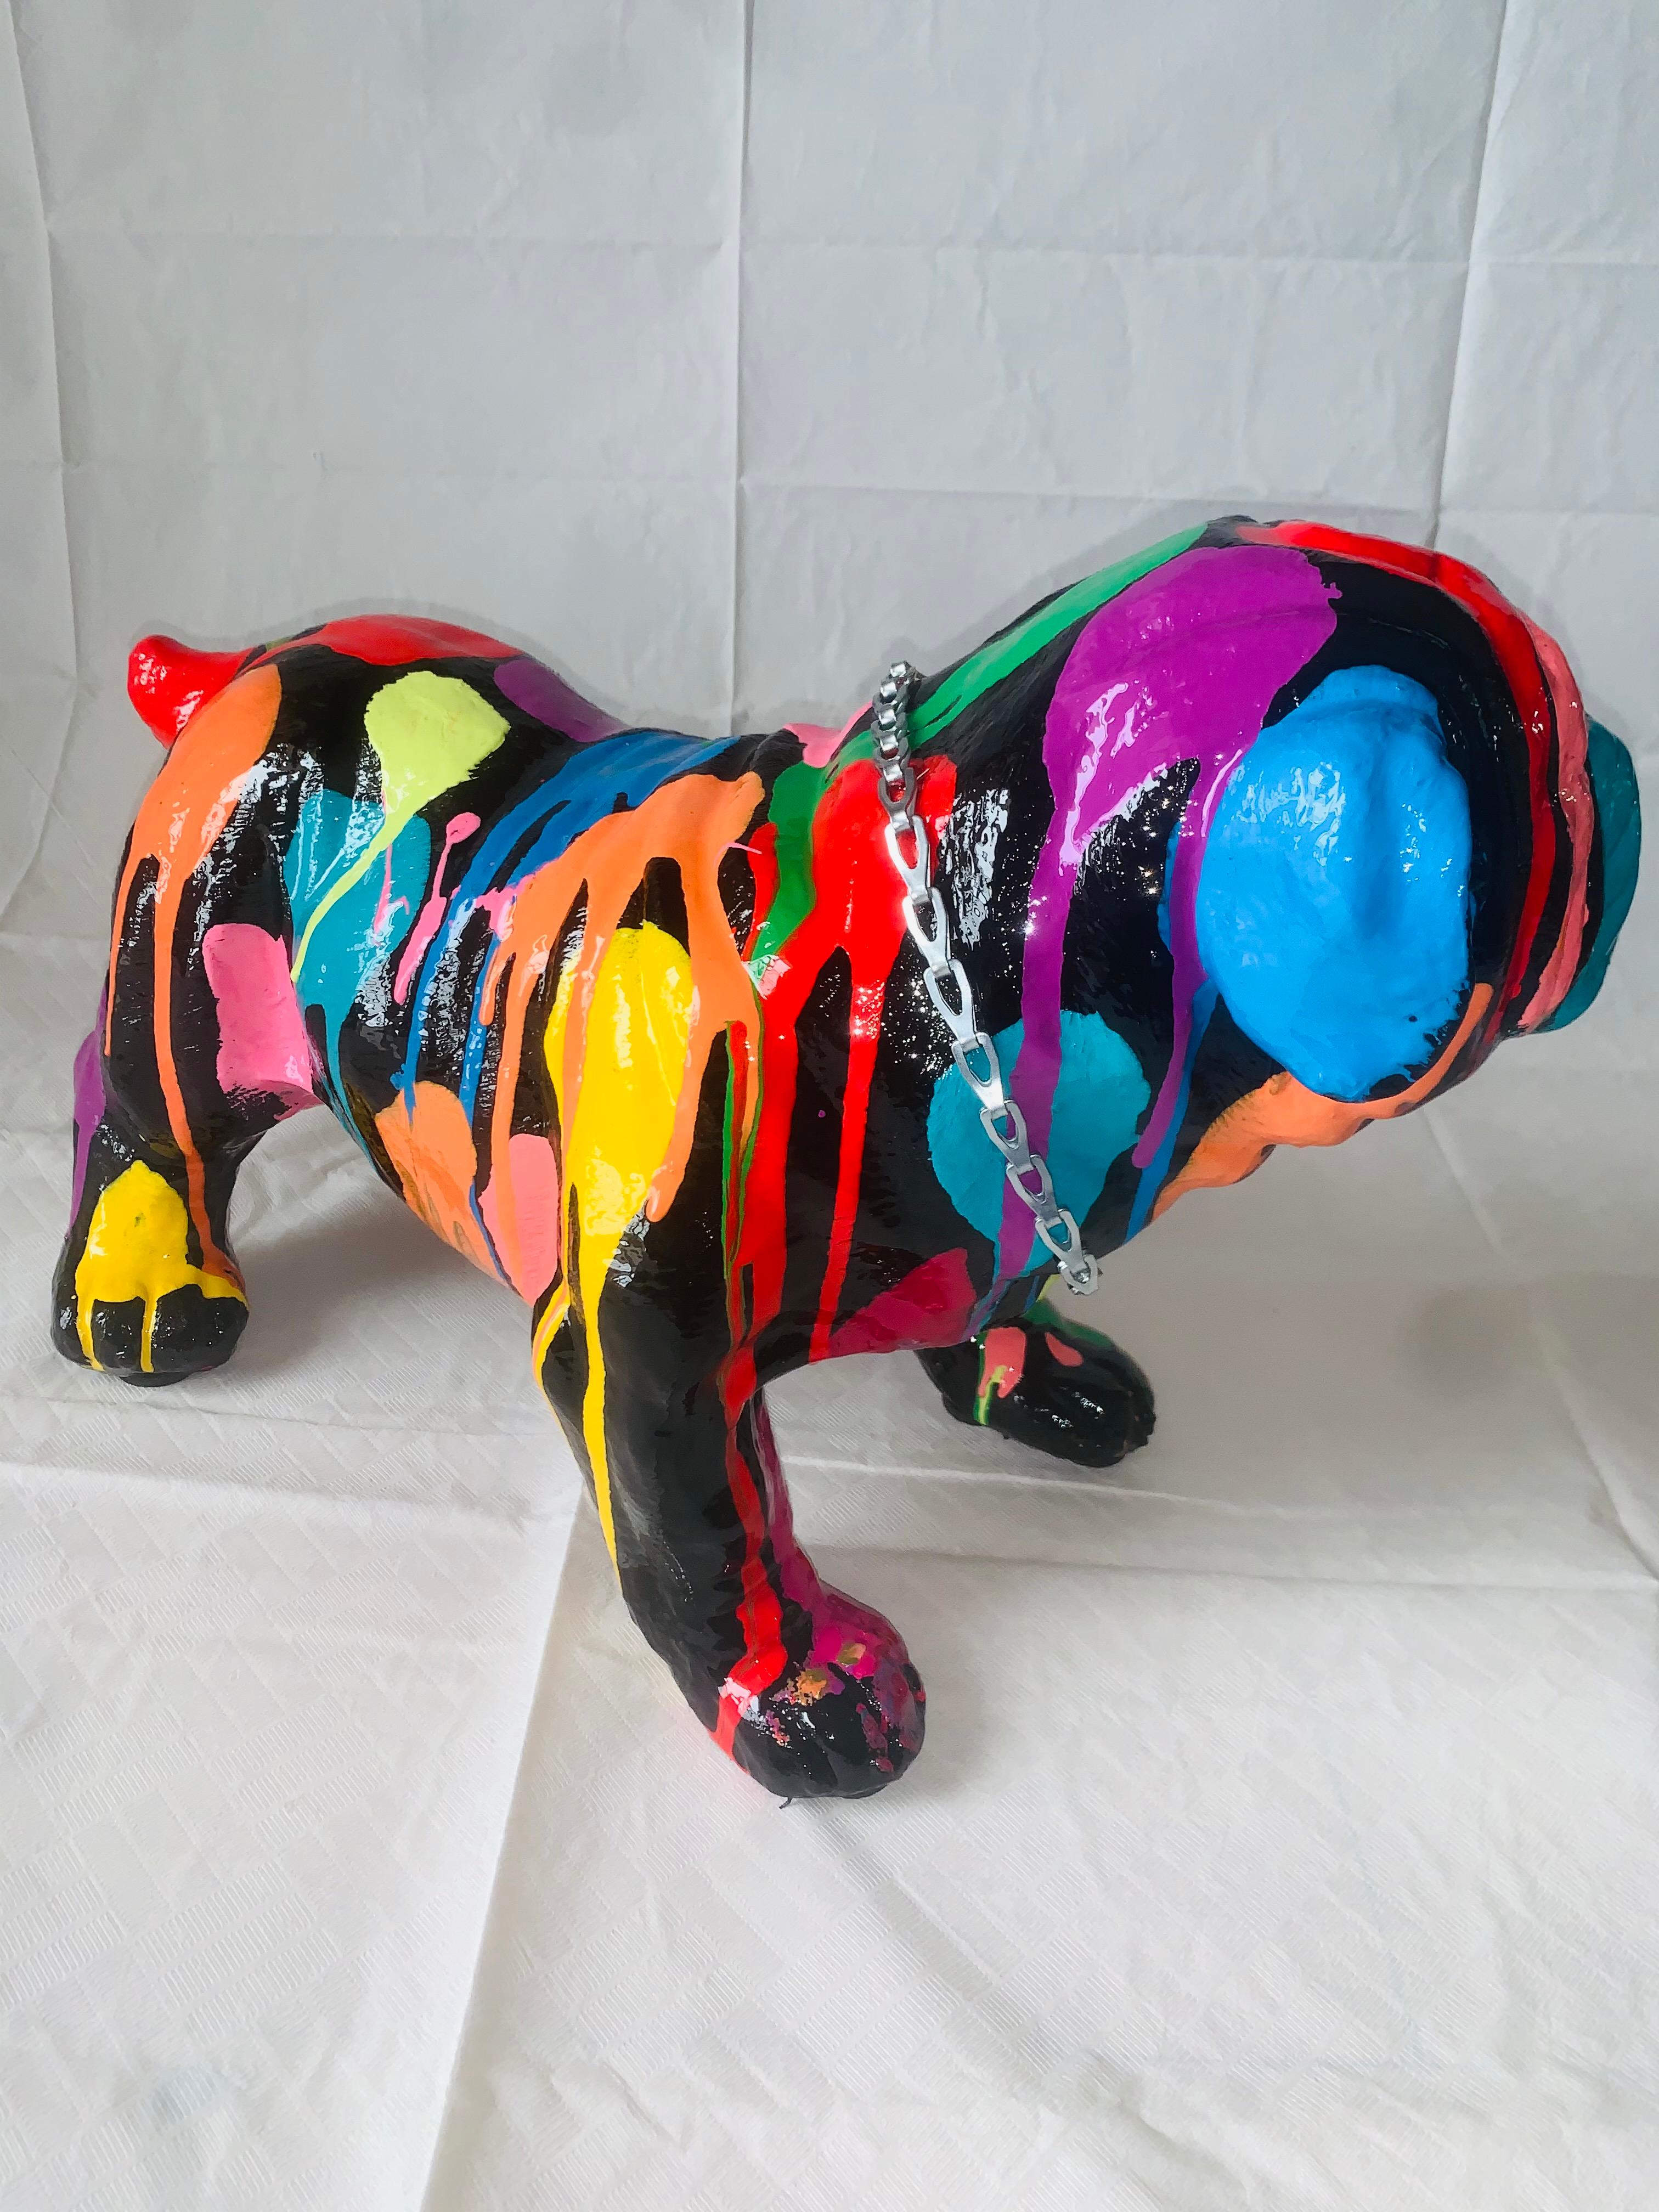 Pop Puppies is an exclusive series of Artist Mauro Oliveira. This exclusive English Bulldog is Oliveira's own cast and design, that means you will only find it here. Made of plaster and steel, each sculpture will receive its own color combination.